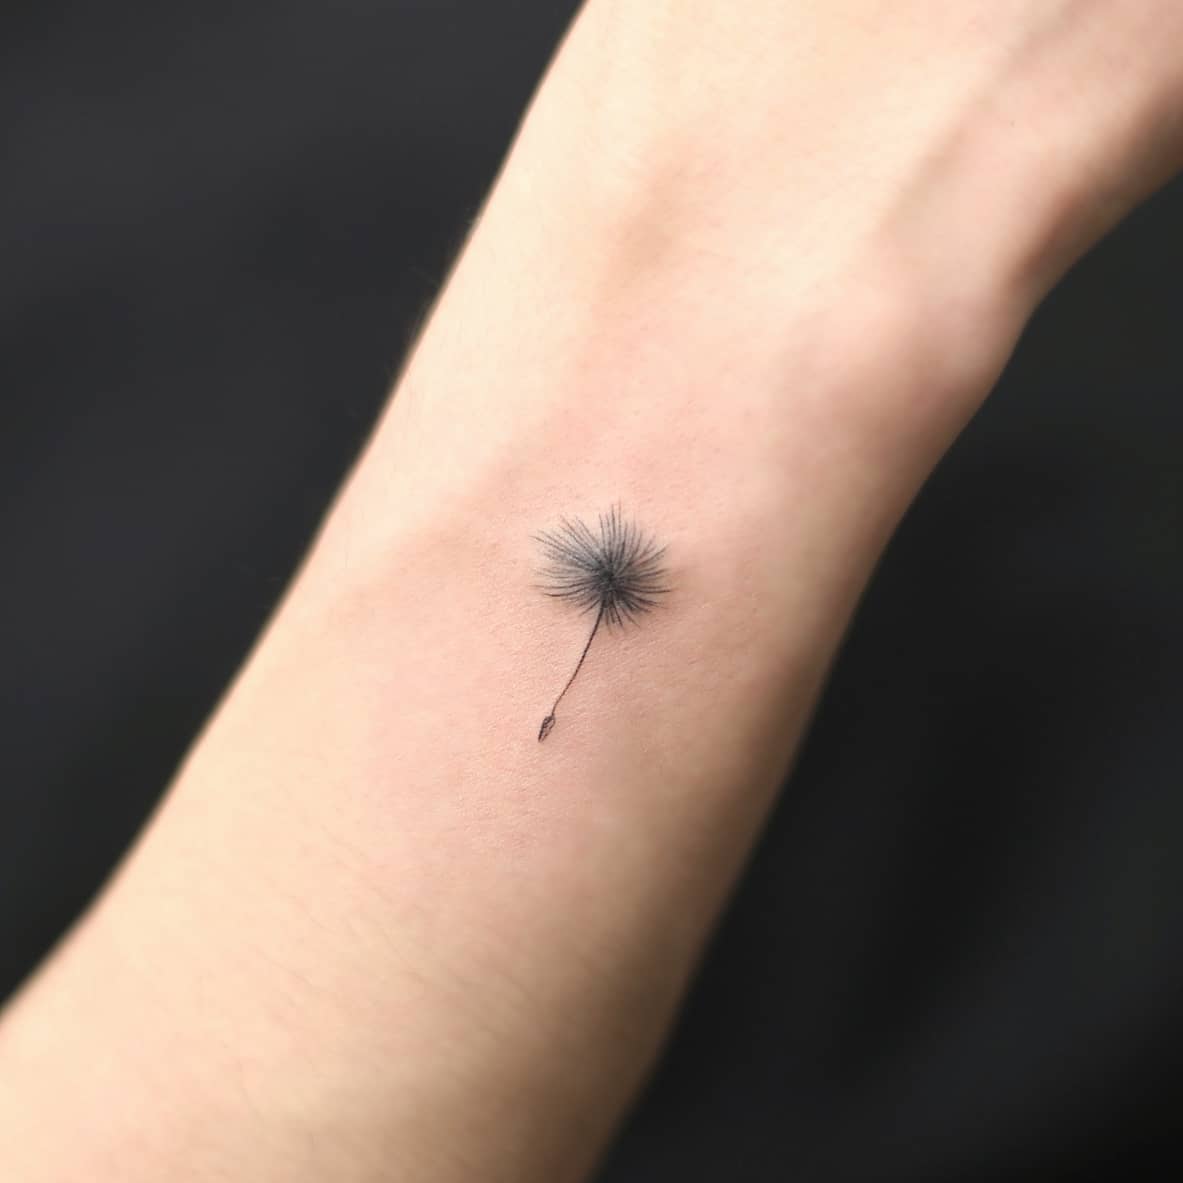 InkPark Tattoo Studio Dhaka - The dandelion tattoo can remind you to enjoy  every moment that you are blessed to have. It shows that life is both  tenacious and delicate and we